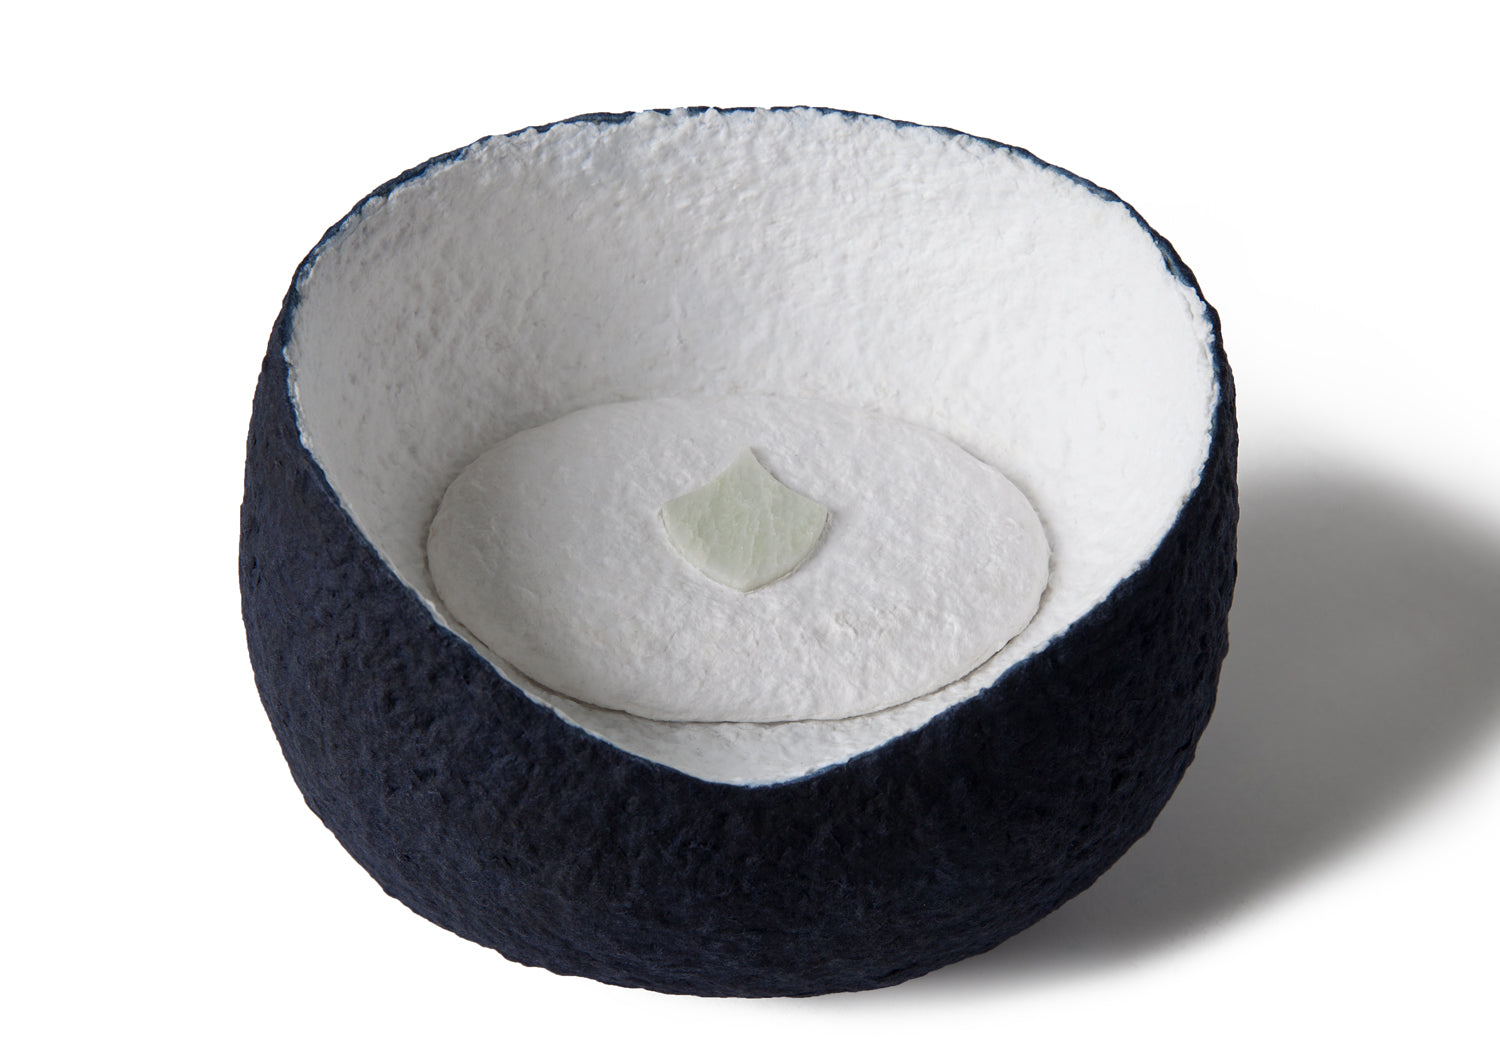 Picture of a white and blue ovoid shaped biodegradable cremation urn for pets on sale at Muses Design Urns. Top view.